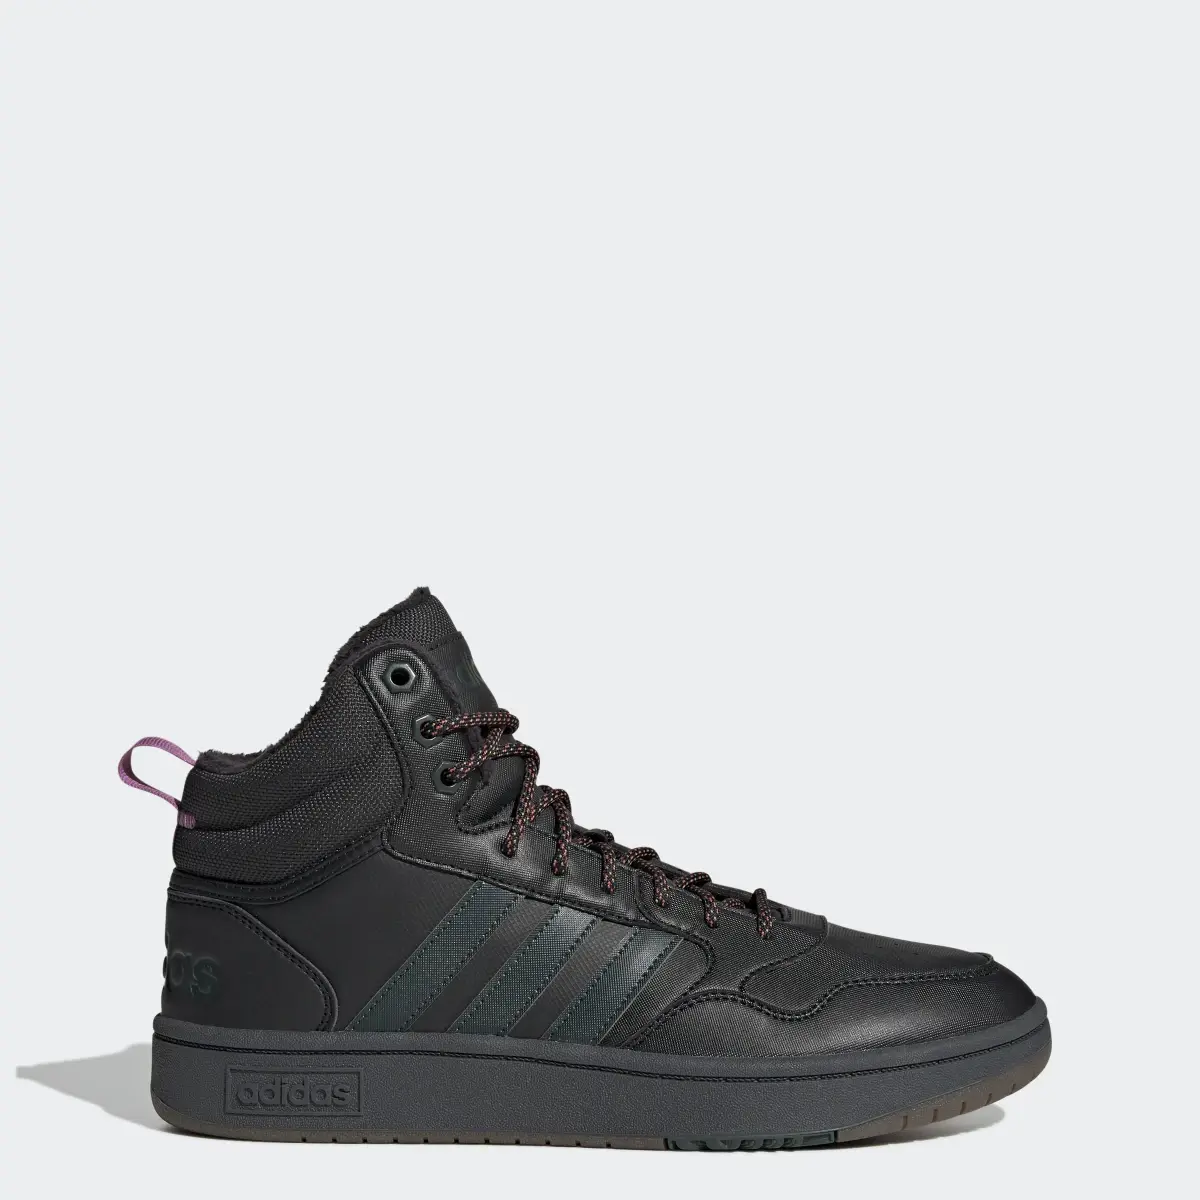 Adidas Hoops 3.0 Mid Lifestyle Basketball Classic Fur Lining Winterized Shoes. 1